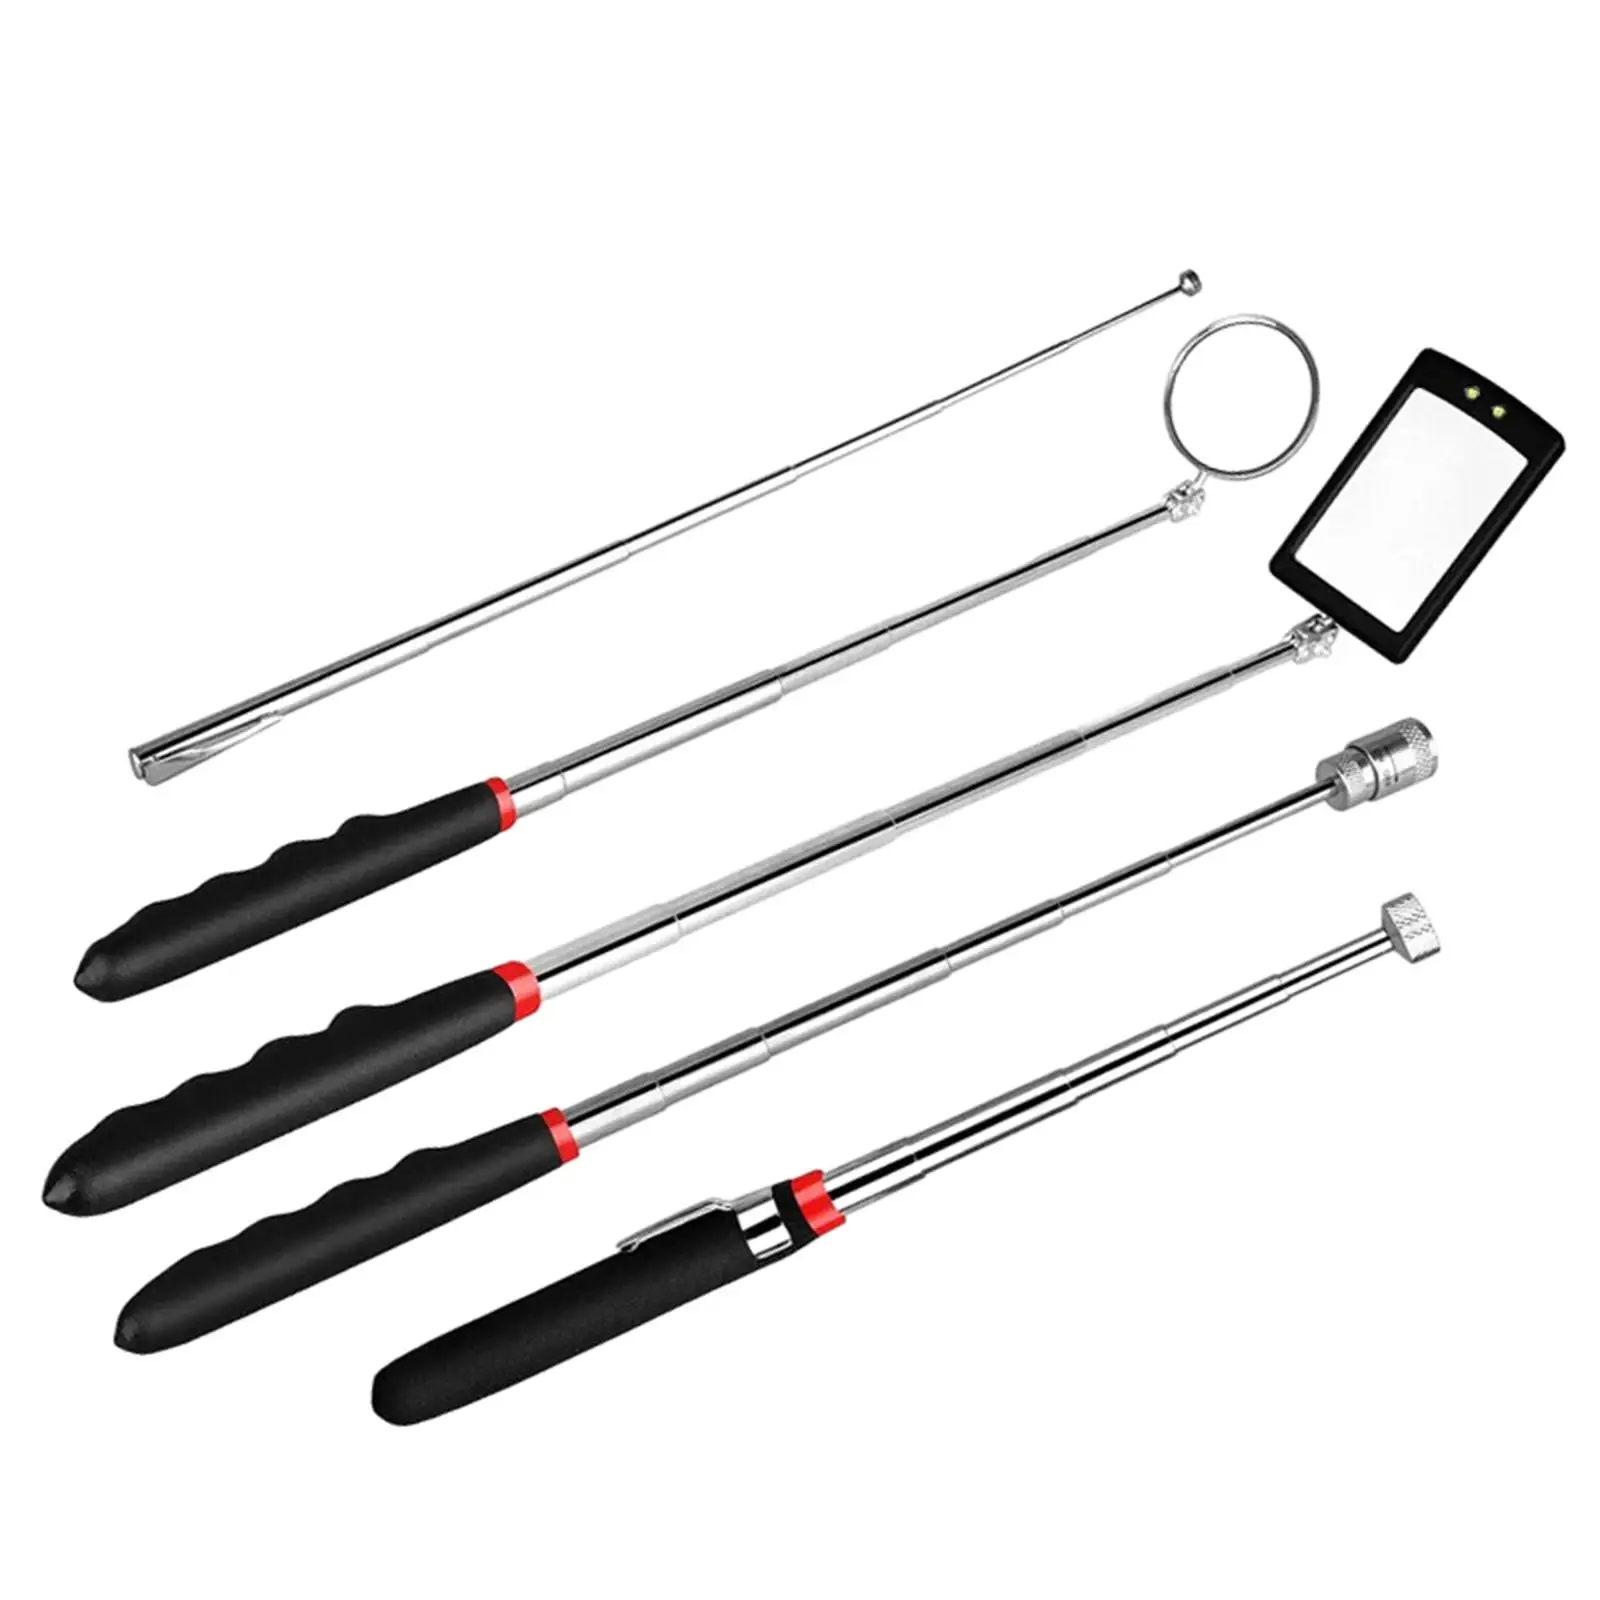 5Pcs Magnetic Telescoping Pick up Tool Kit Lightweight Battery Powered Sturdy